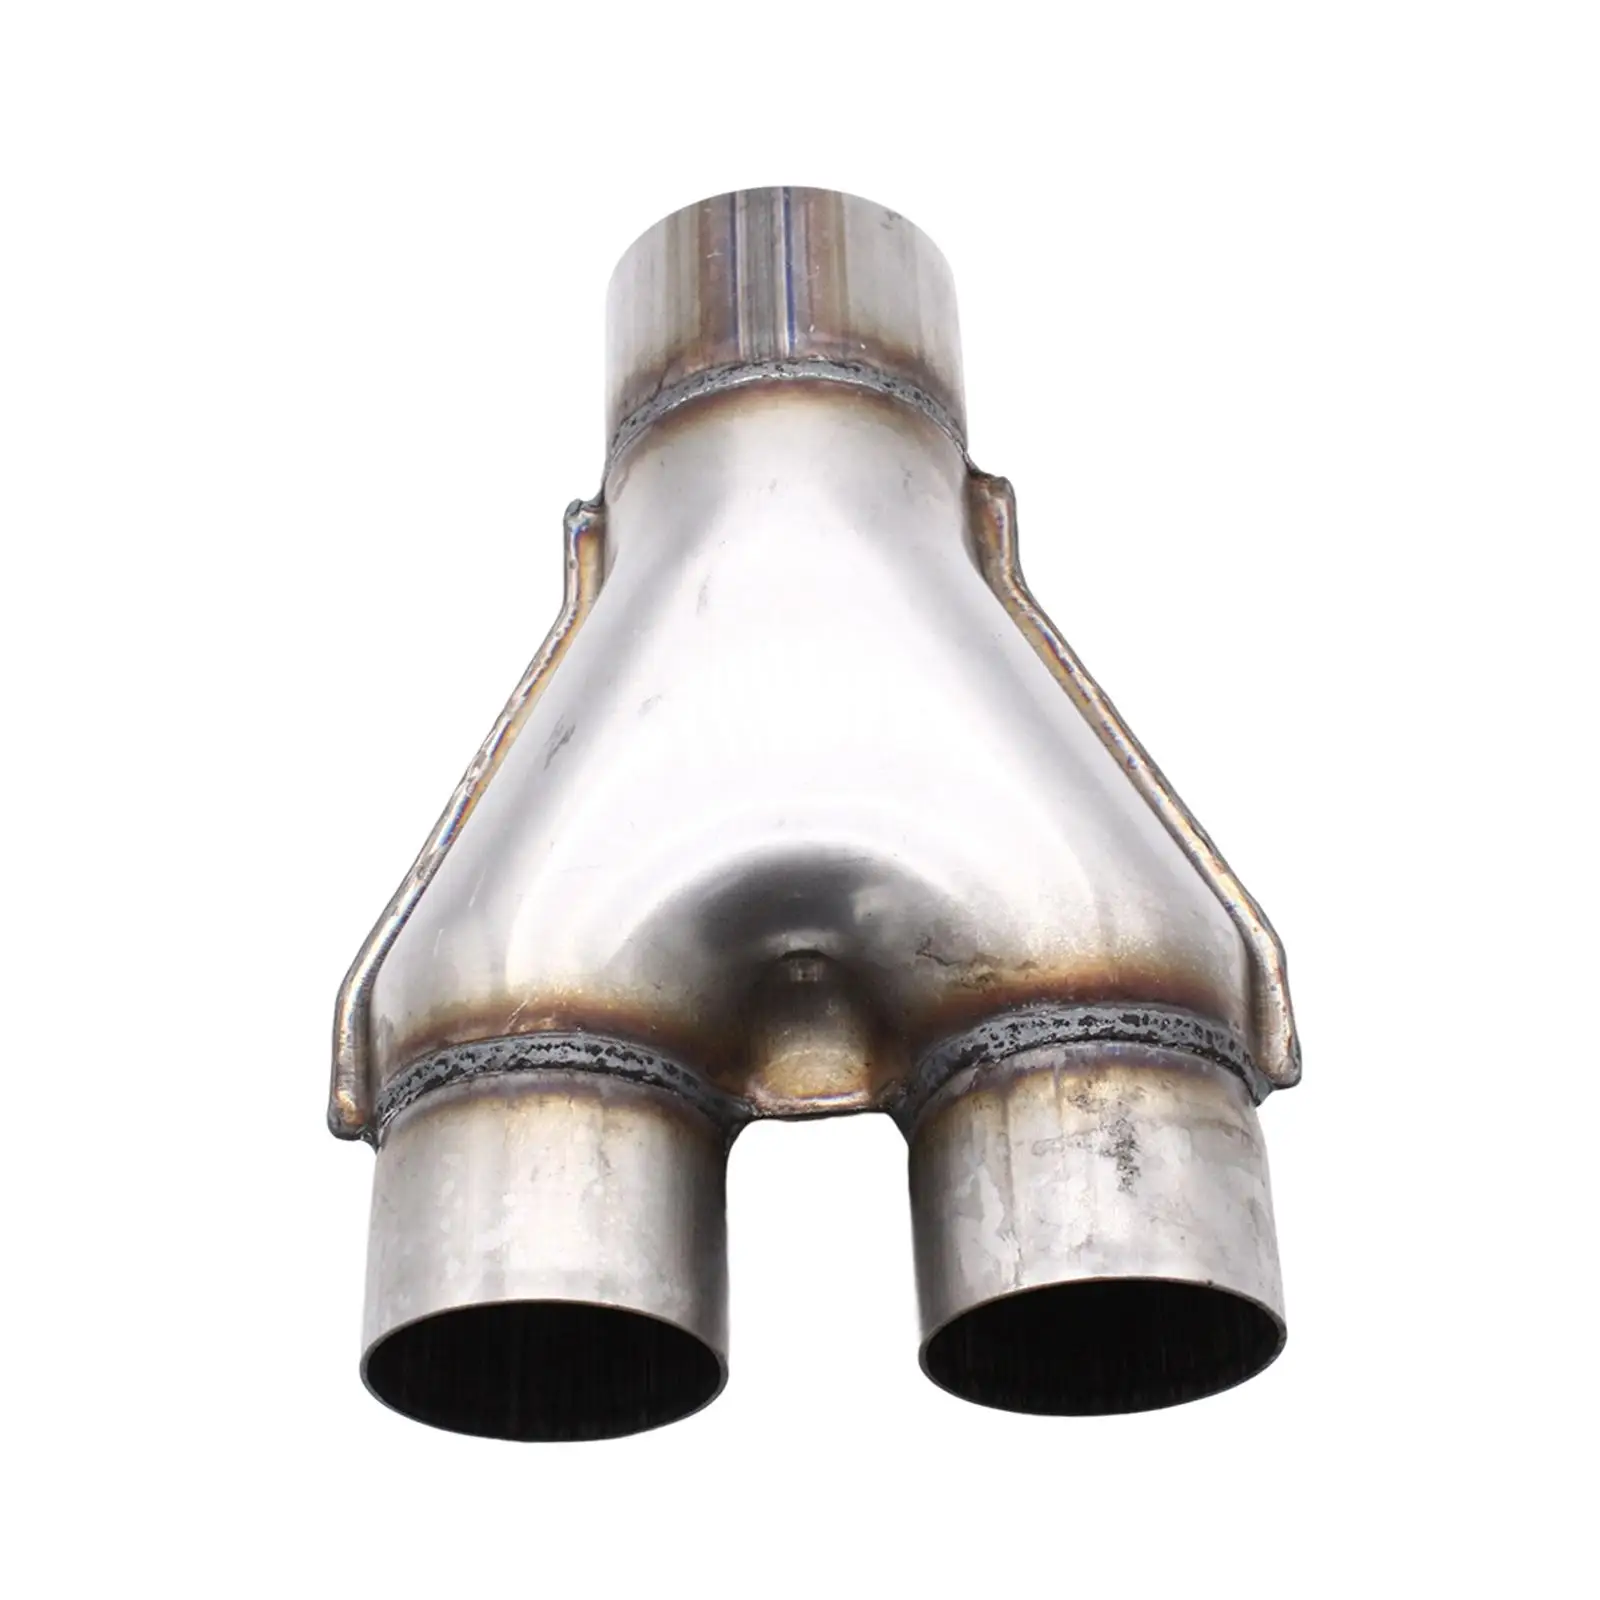 3inch Single to 2 1/2inch Dual Exhaust Adapter Y Pipe Professional Stainless Steel Accessories Weld on for Car Truck Universal